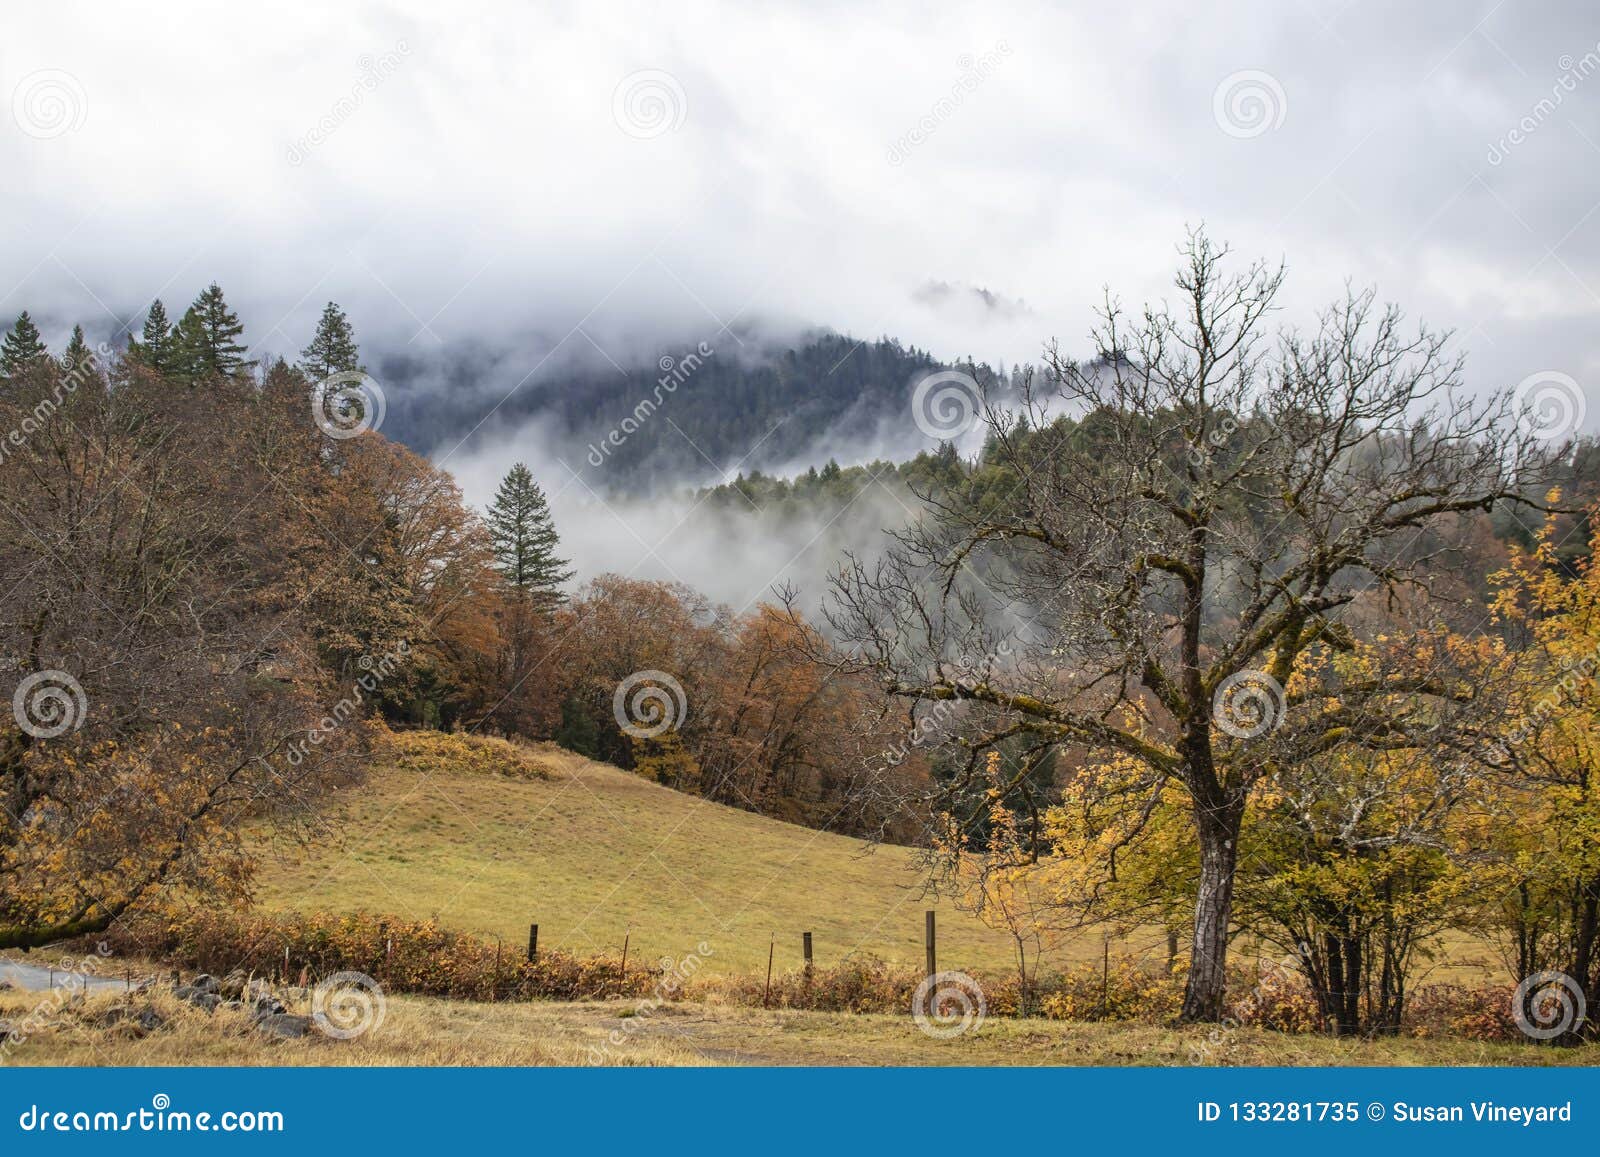 misty mountains - open field and fence with trees and fog on the mountians in the background in autumn